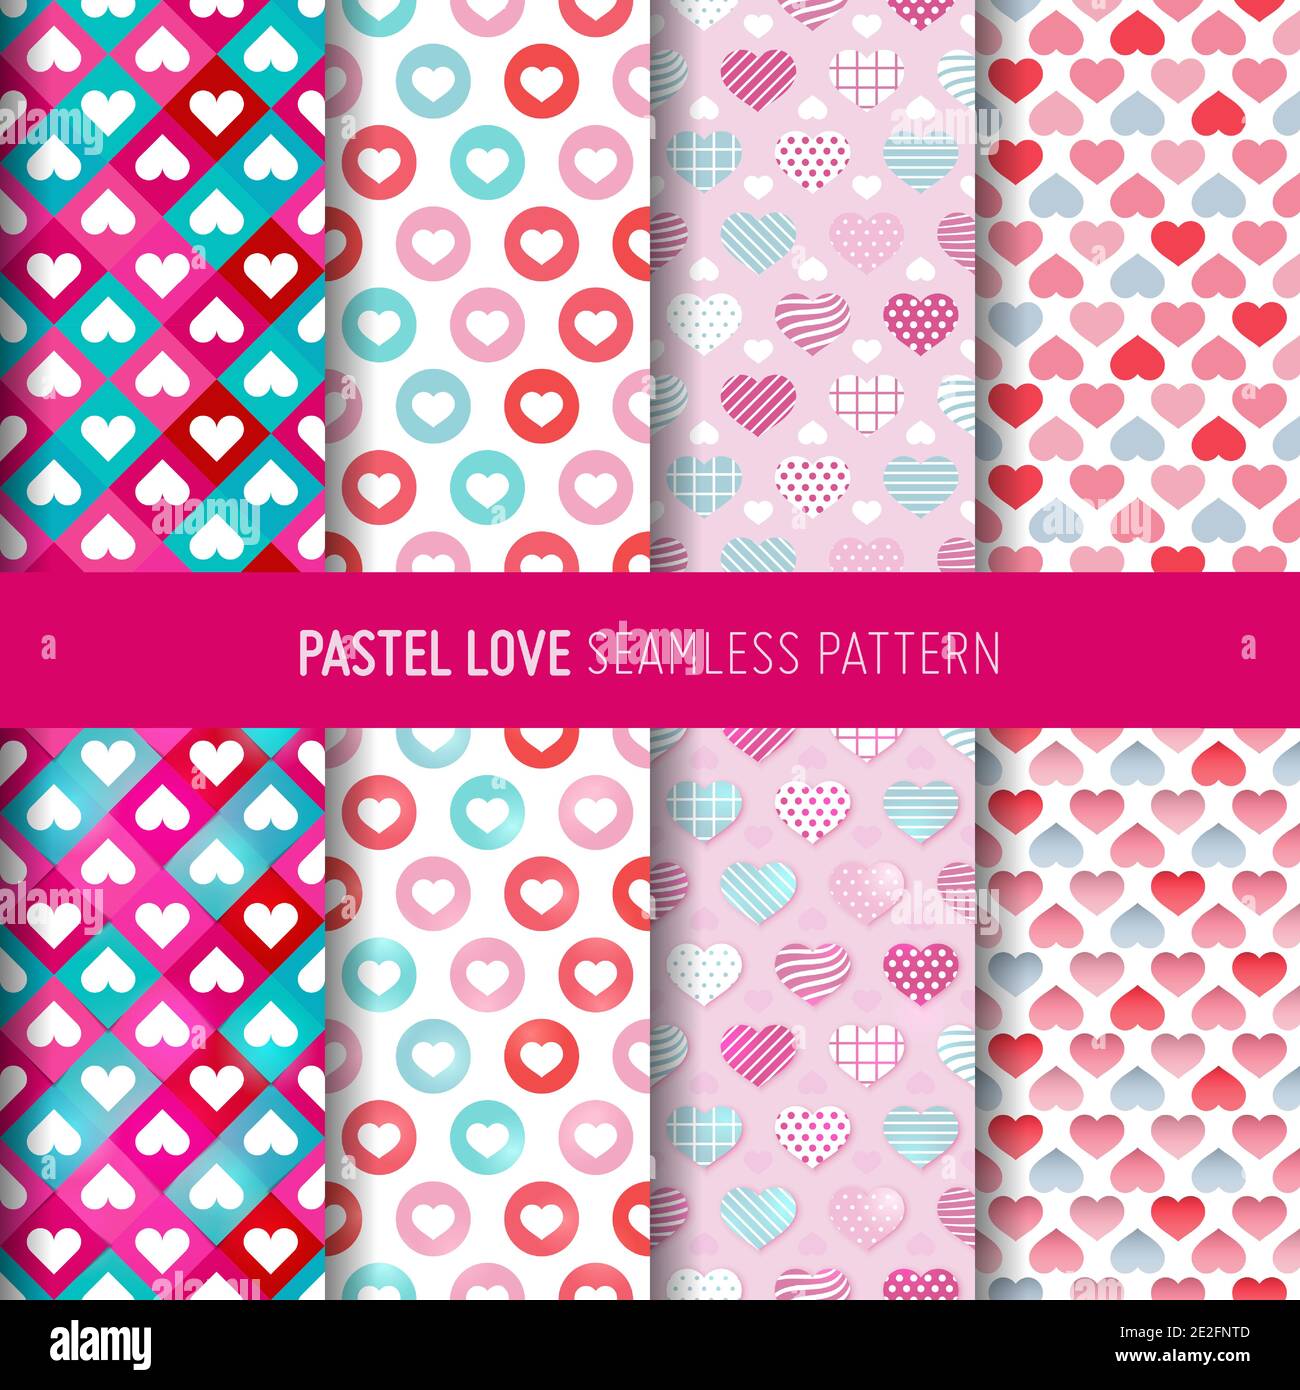 Love symbol seamless pattern. Valentine's day gift wrap paper and  pastel background. Stock Vector